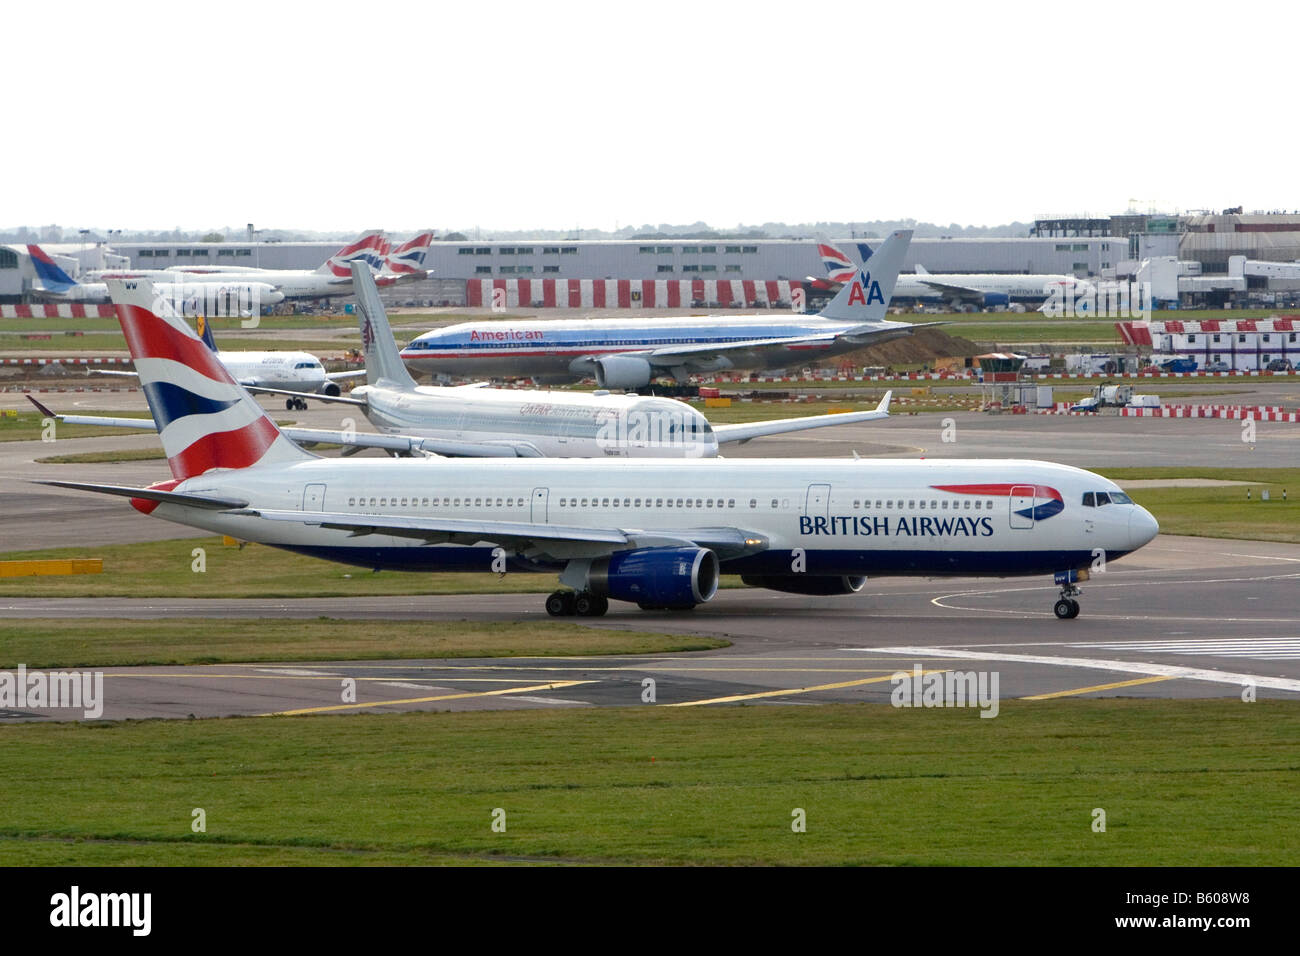 Airliners on the runway at London Heathrow Airport England United Kingdom Stock Photo